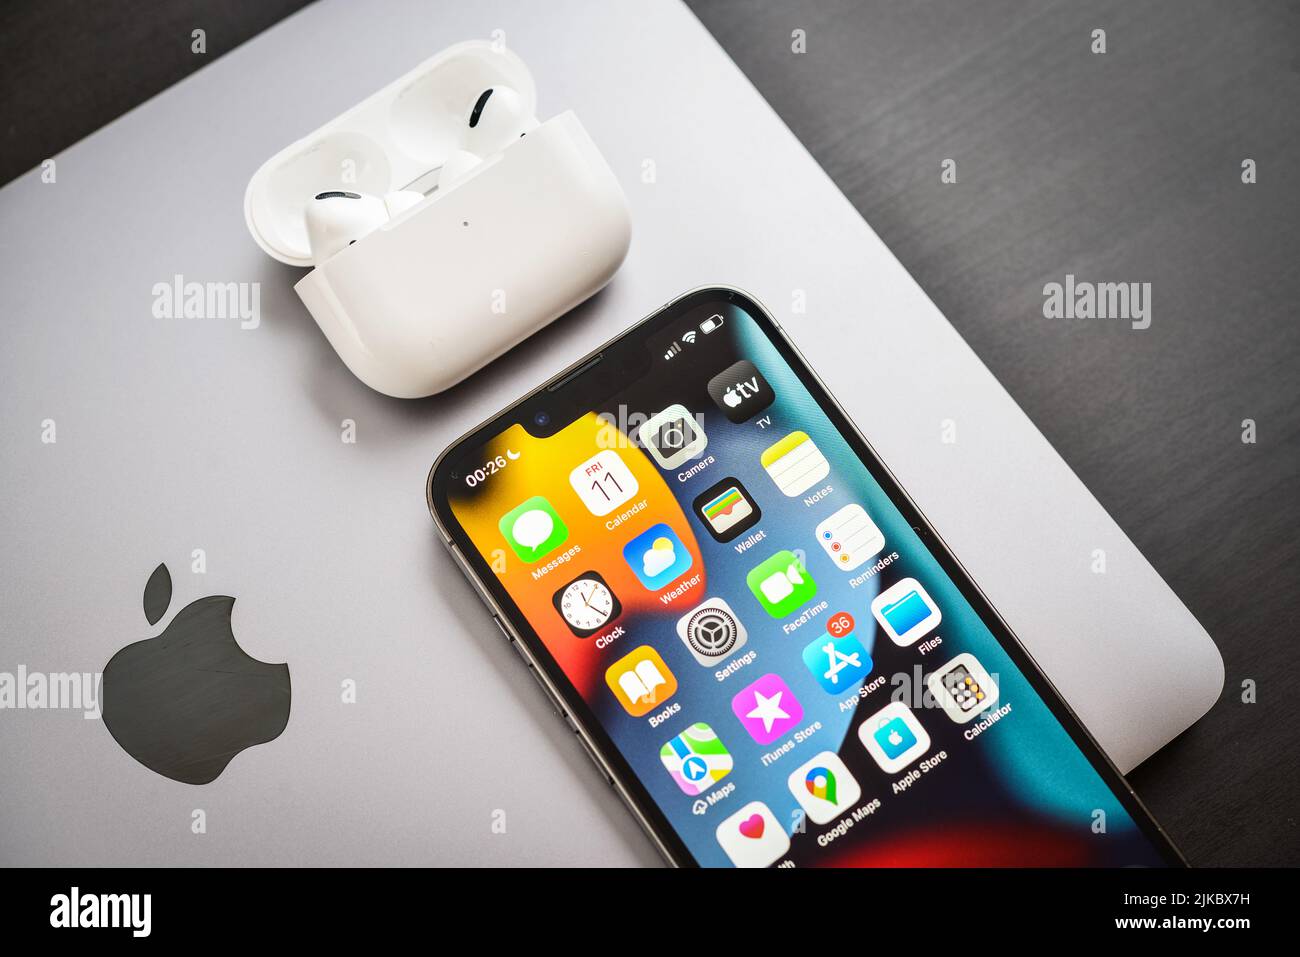 KIEV, UKRAINE - FEBRUARY 10, 2022: Apple product. MacBook Pro, iPhone 13 Pro with AirPods Pro headphones on a black background top view. Technology ga Stock Photo